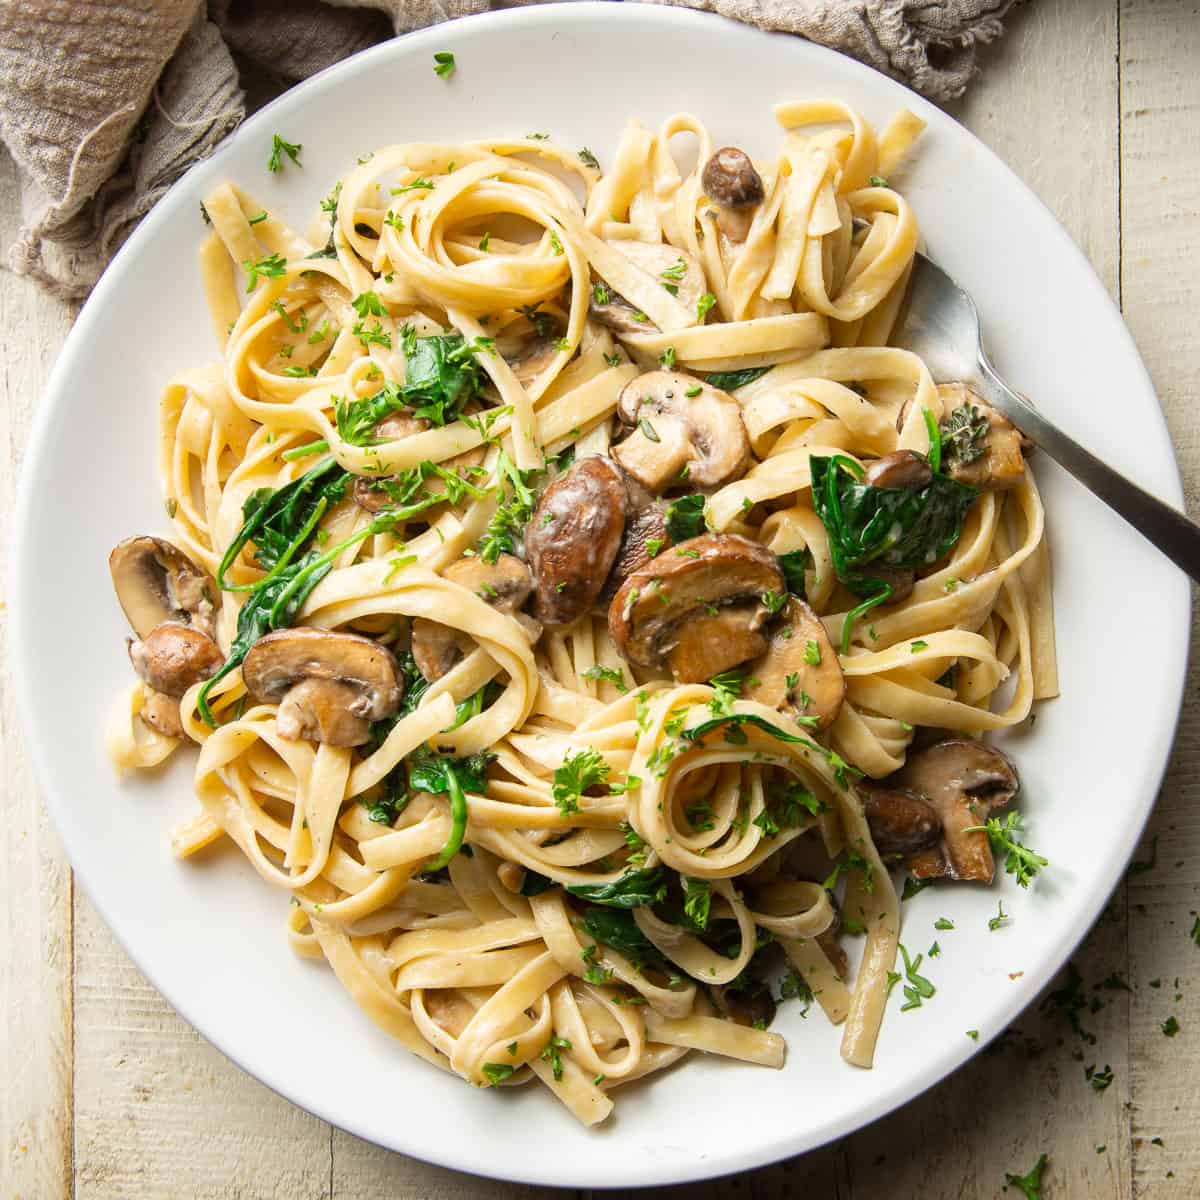 Plate of Vegan Mushroom Pasta with a fork.